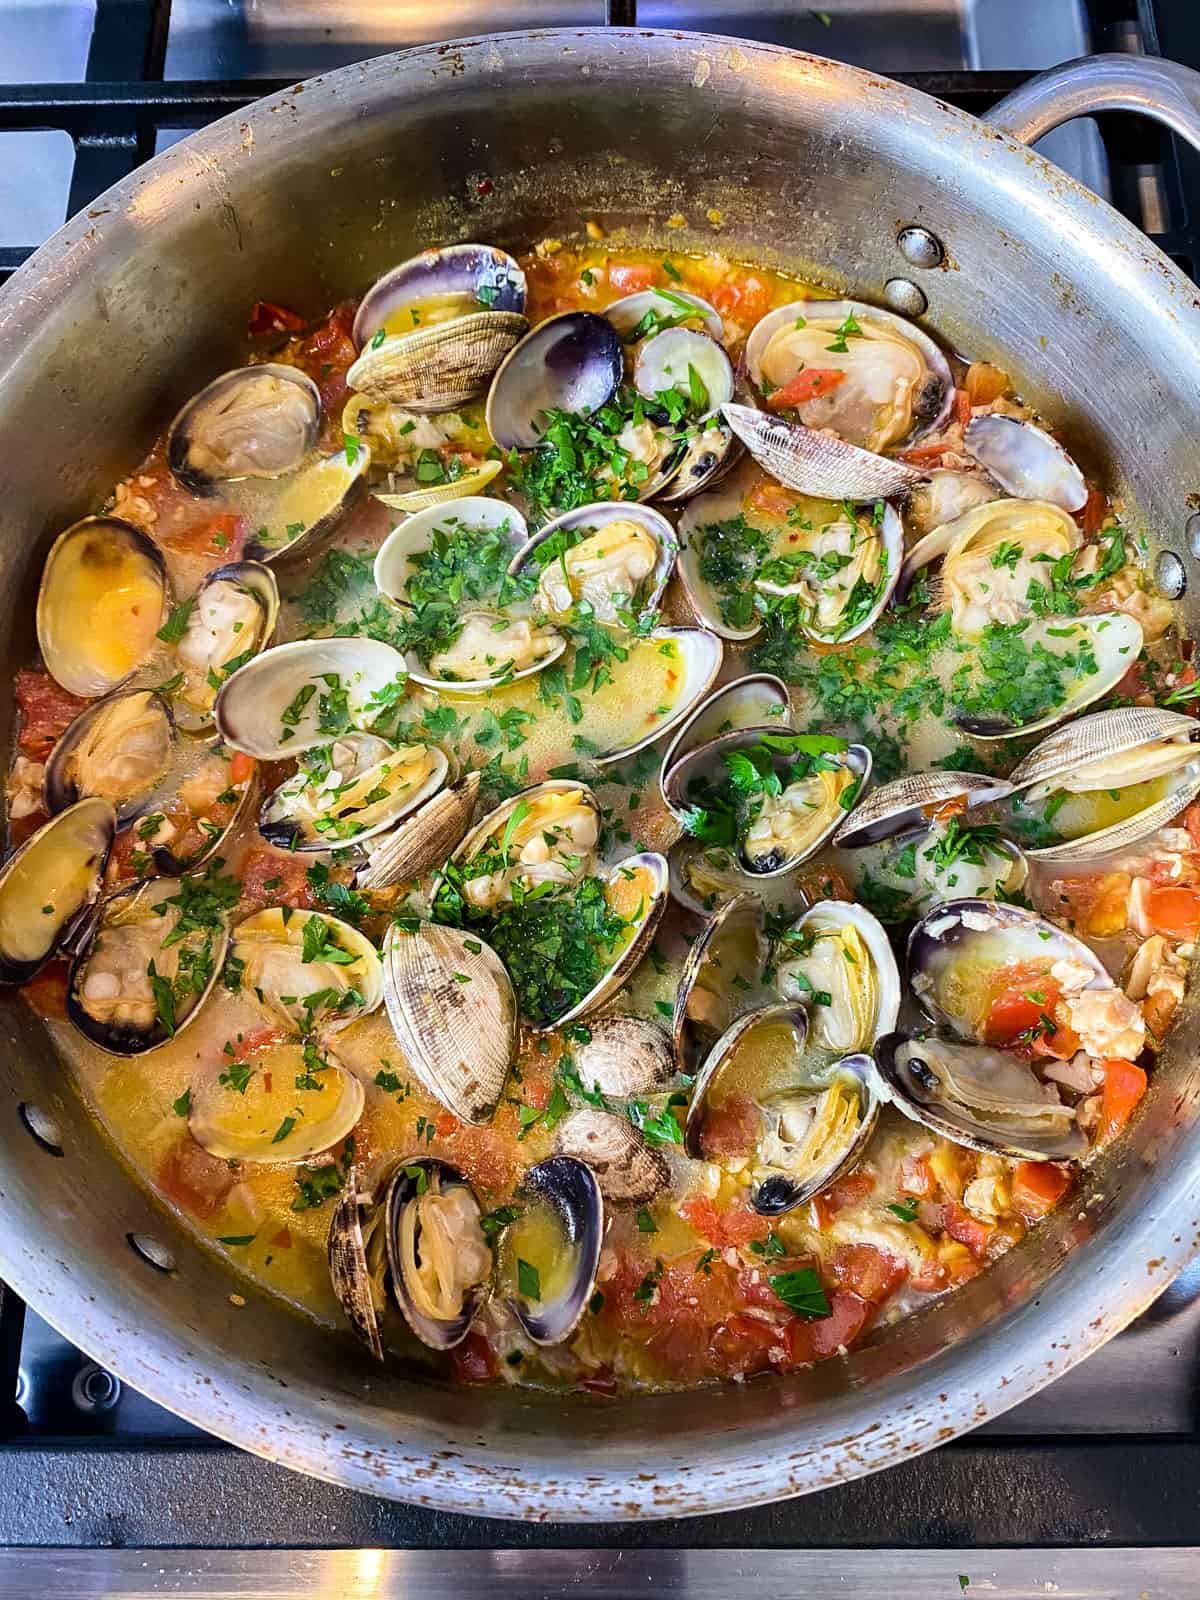 Add chopped fresh parsley as soon as the clams are done cooking.